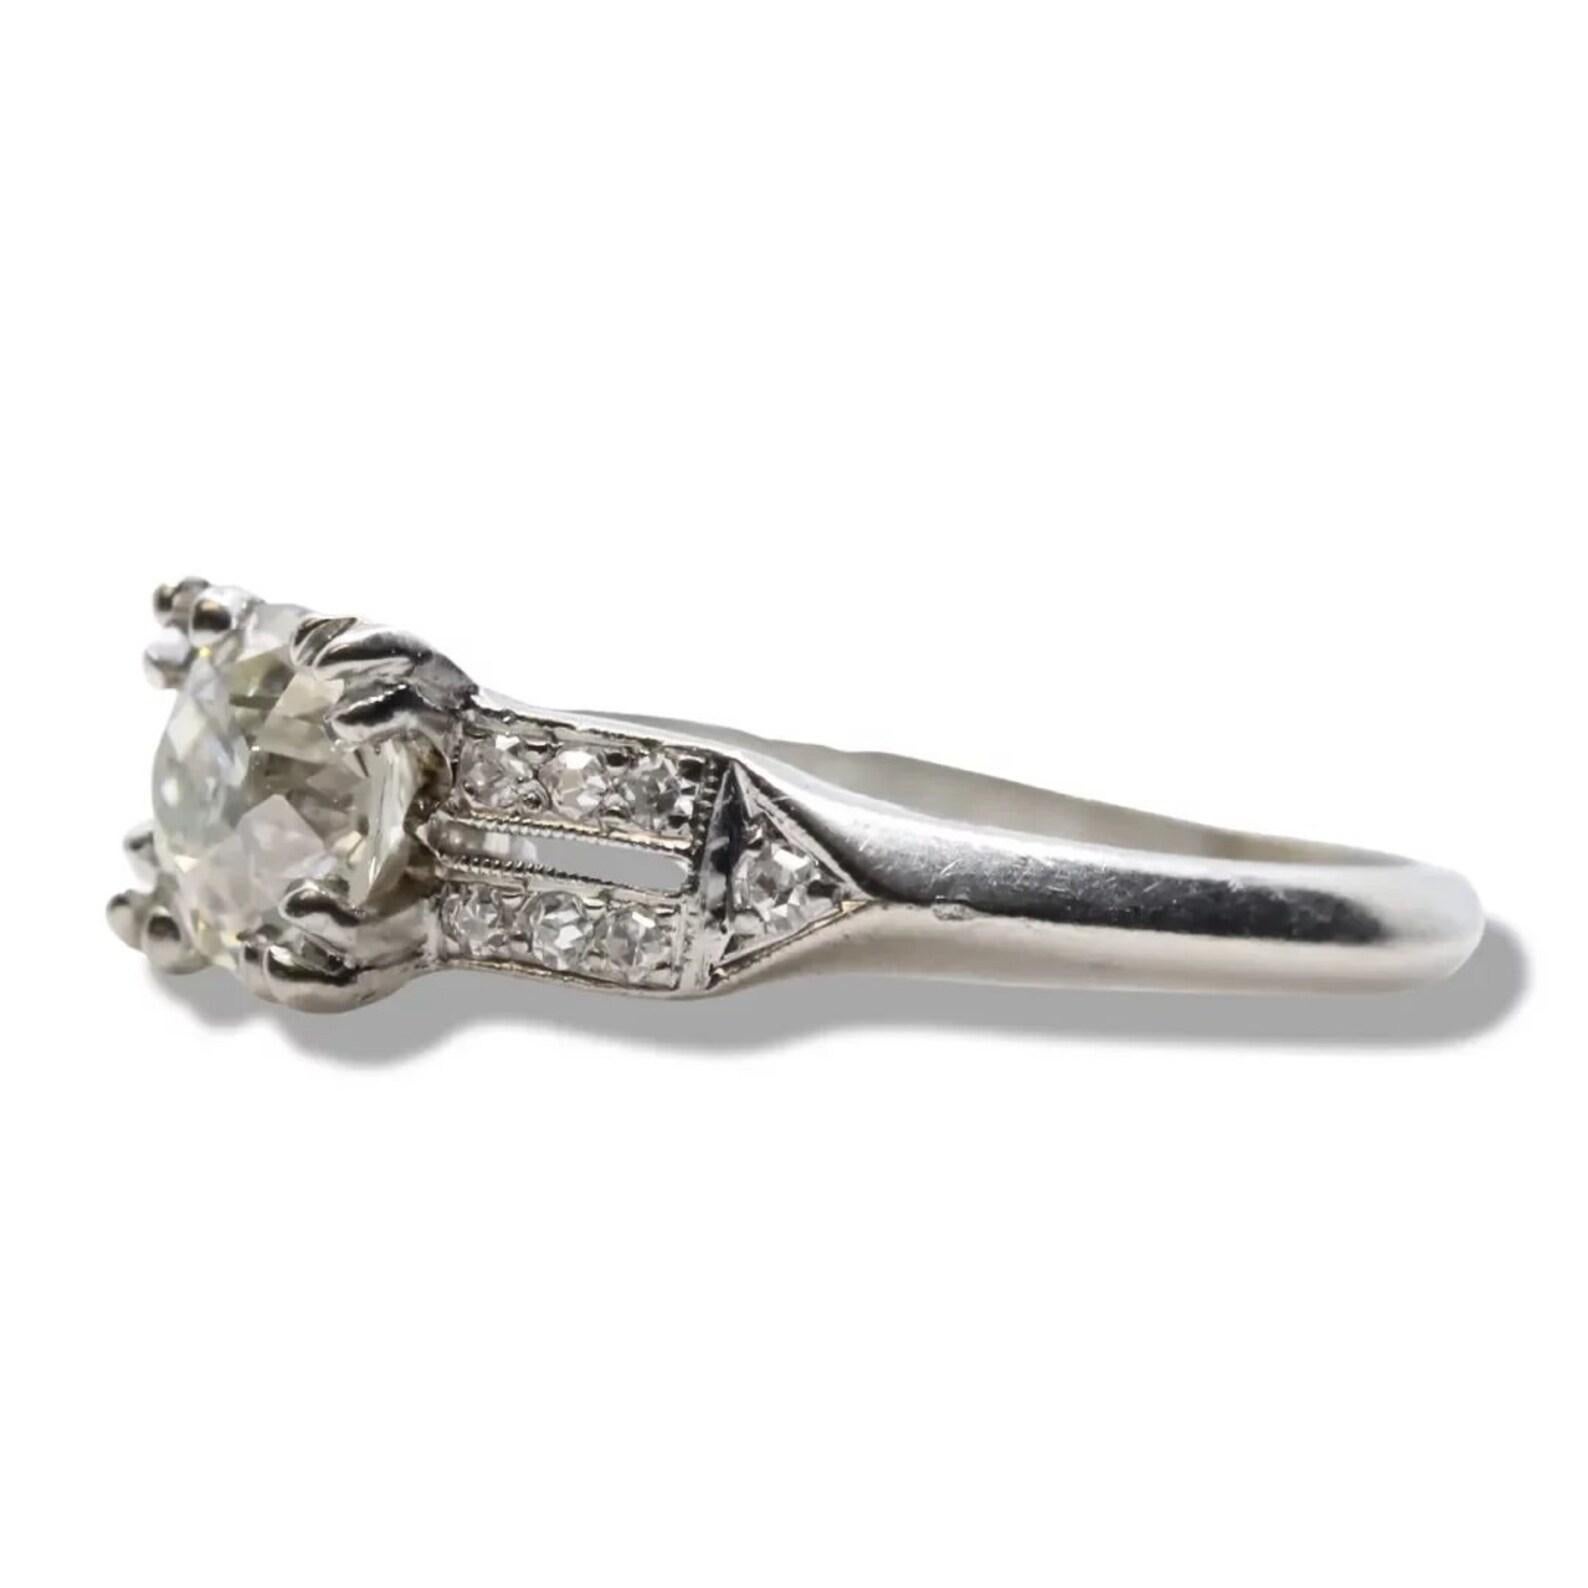 A handmade original Art Deco period diamond engagement ring in platinum. Centered by a 0.80 carat antique European cut diamond of G color and VS2 clarity secured by handmade claw form prongs. Framing the center diamond are fourteen pave set